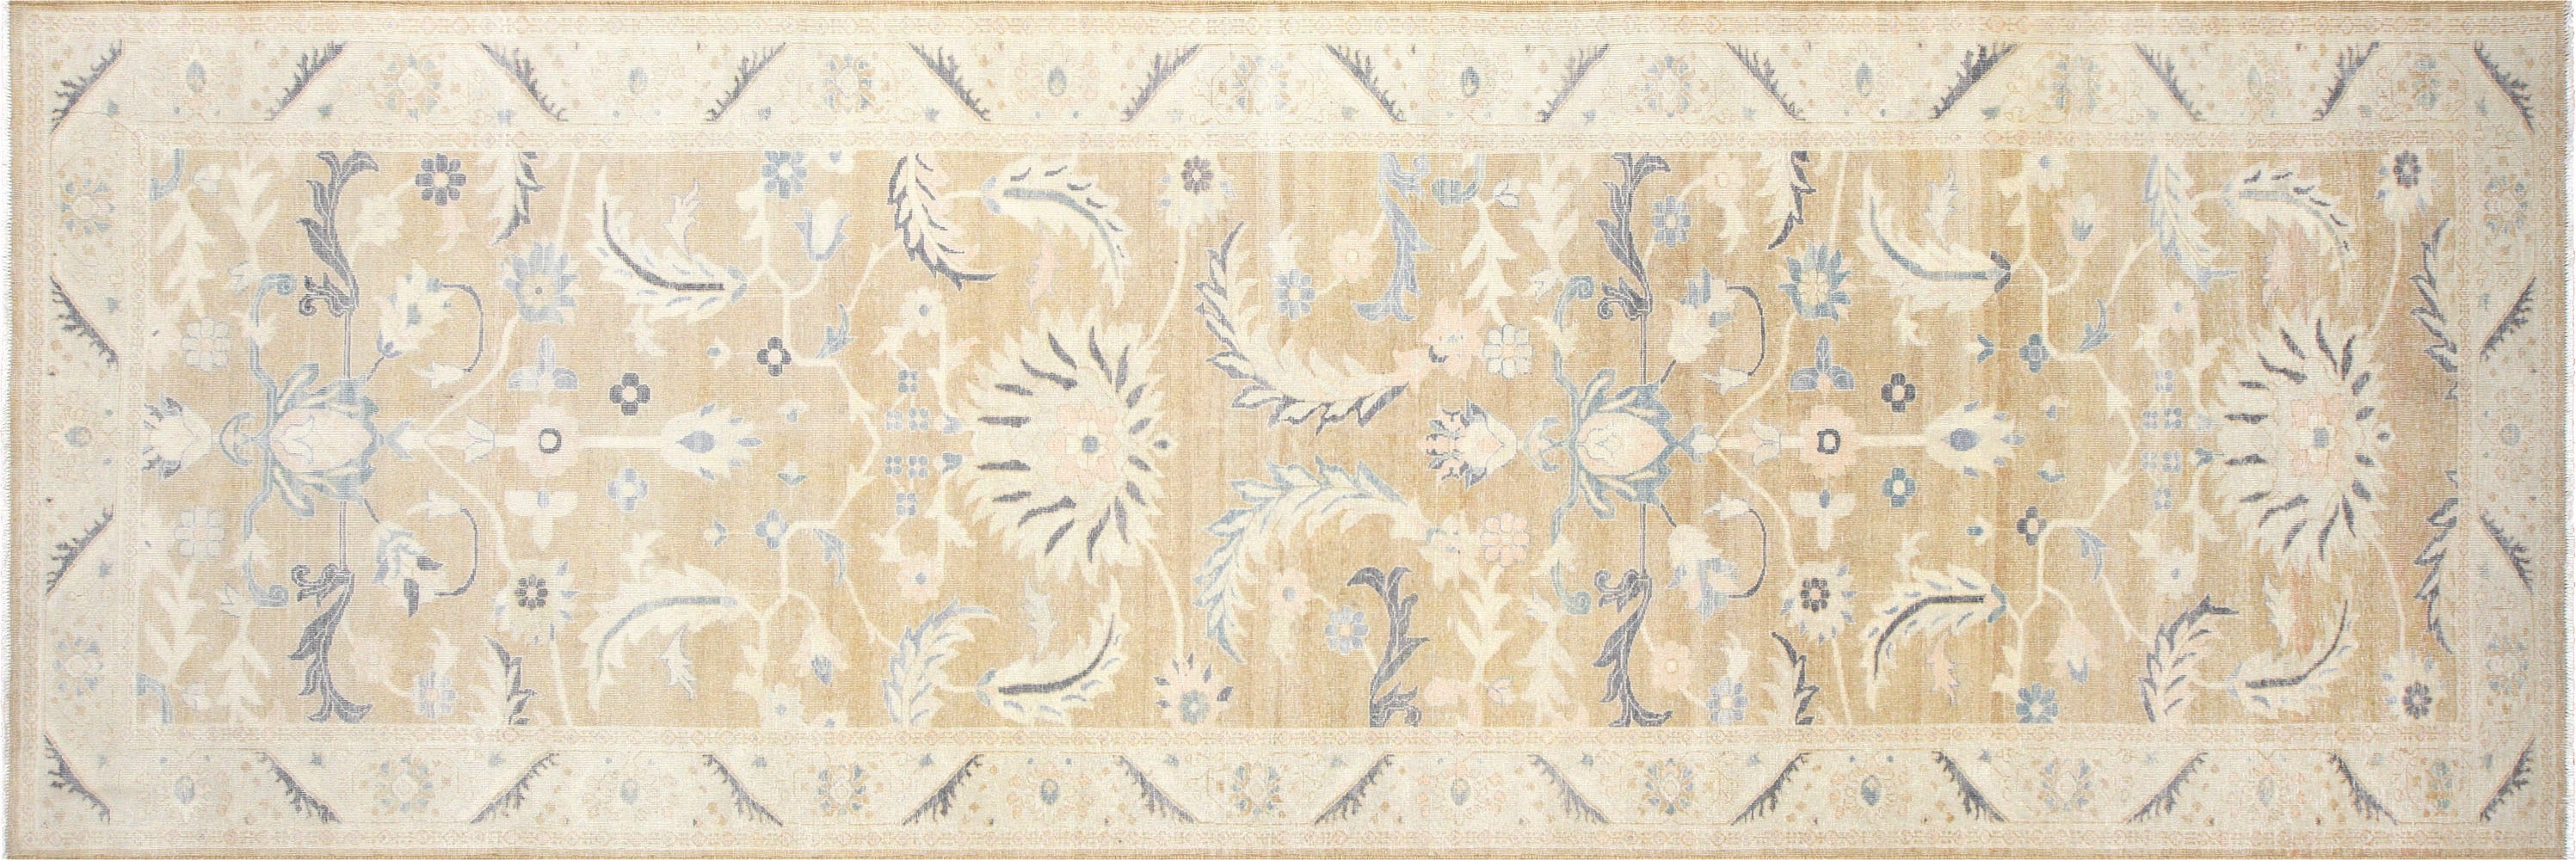 Recently Woven Egyptian Sultanabad Carpet - 4'11" x 14'10"